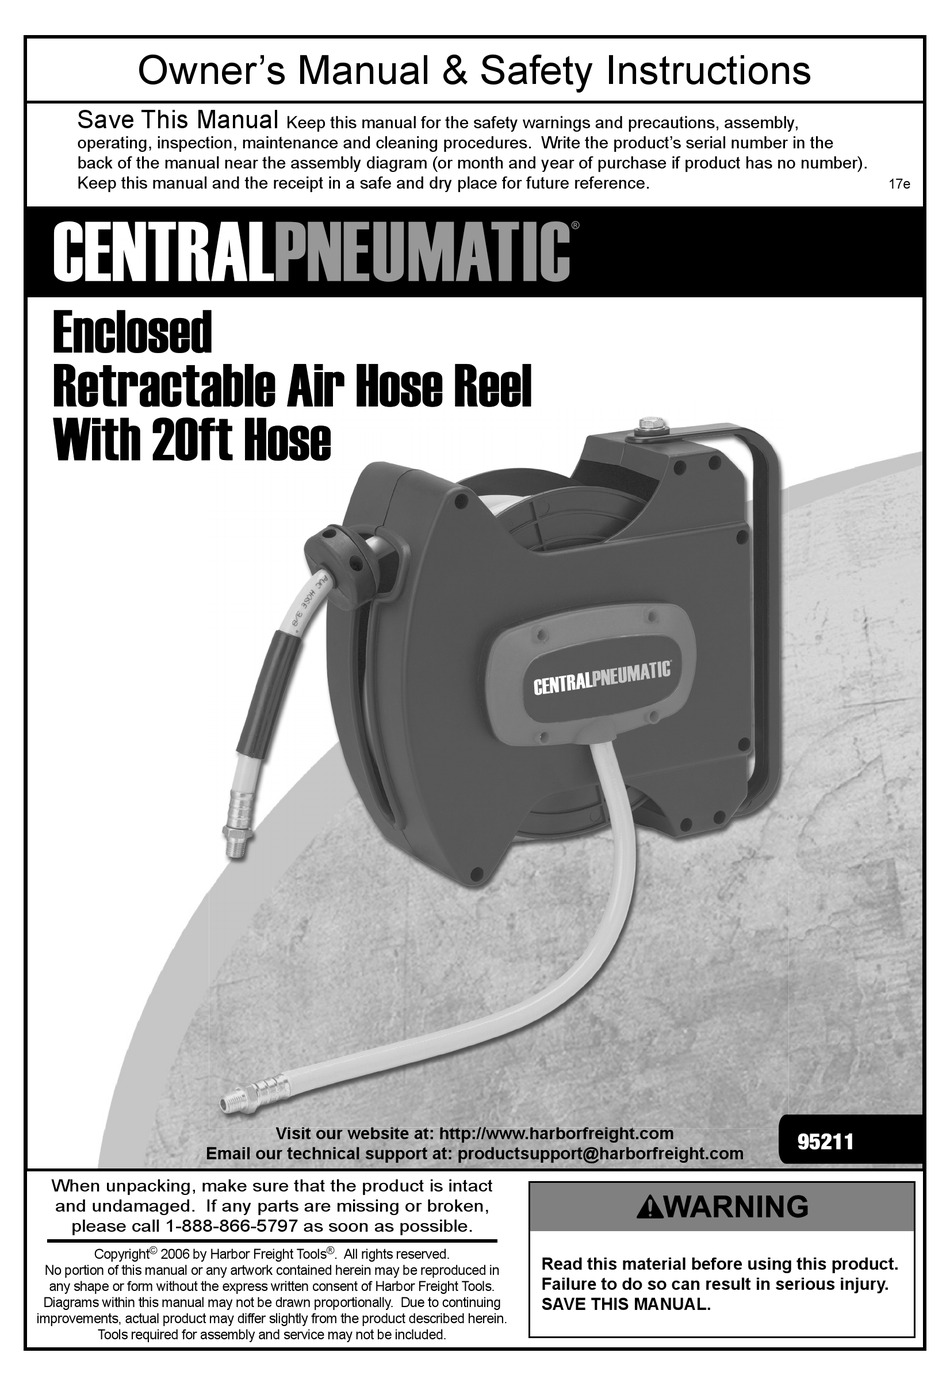 CENTRAL PNEUMATIC 95211 OWNER'S MANUAL AND SAFETY INSTRUCTIONS Pdf